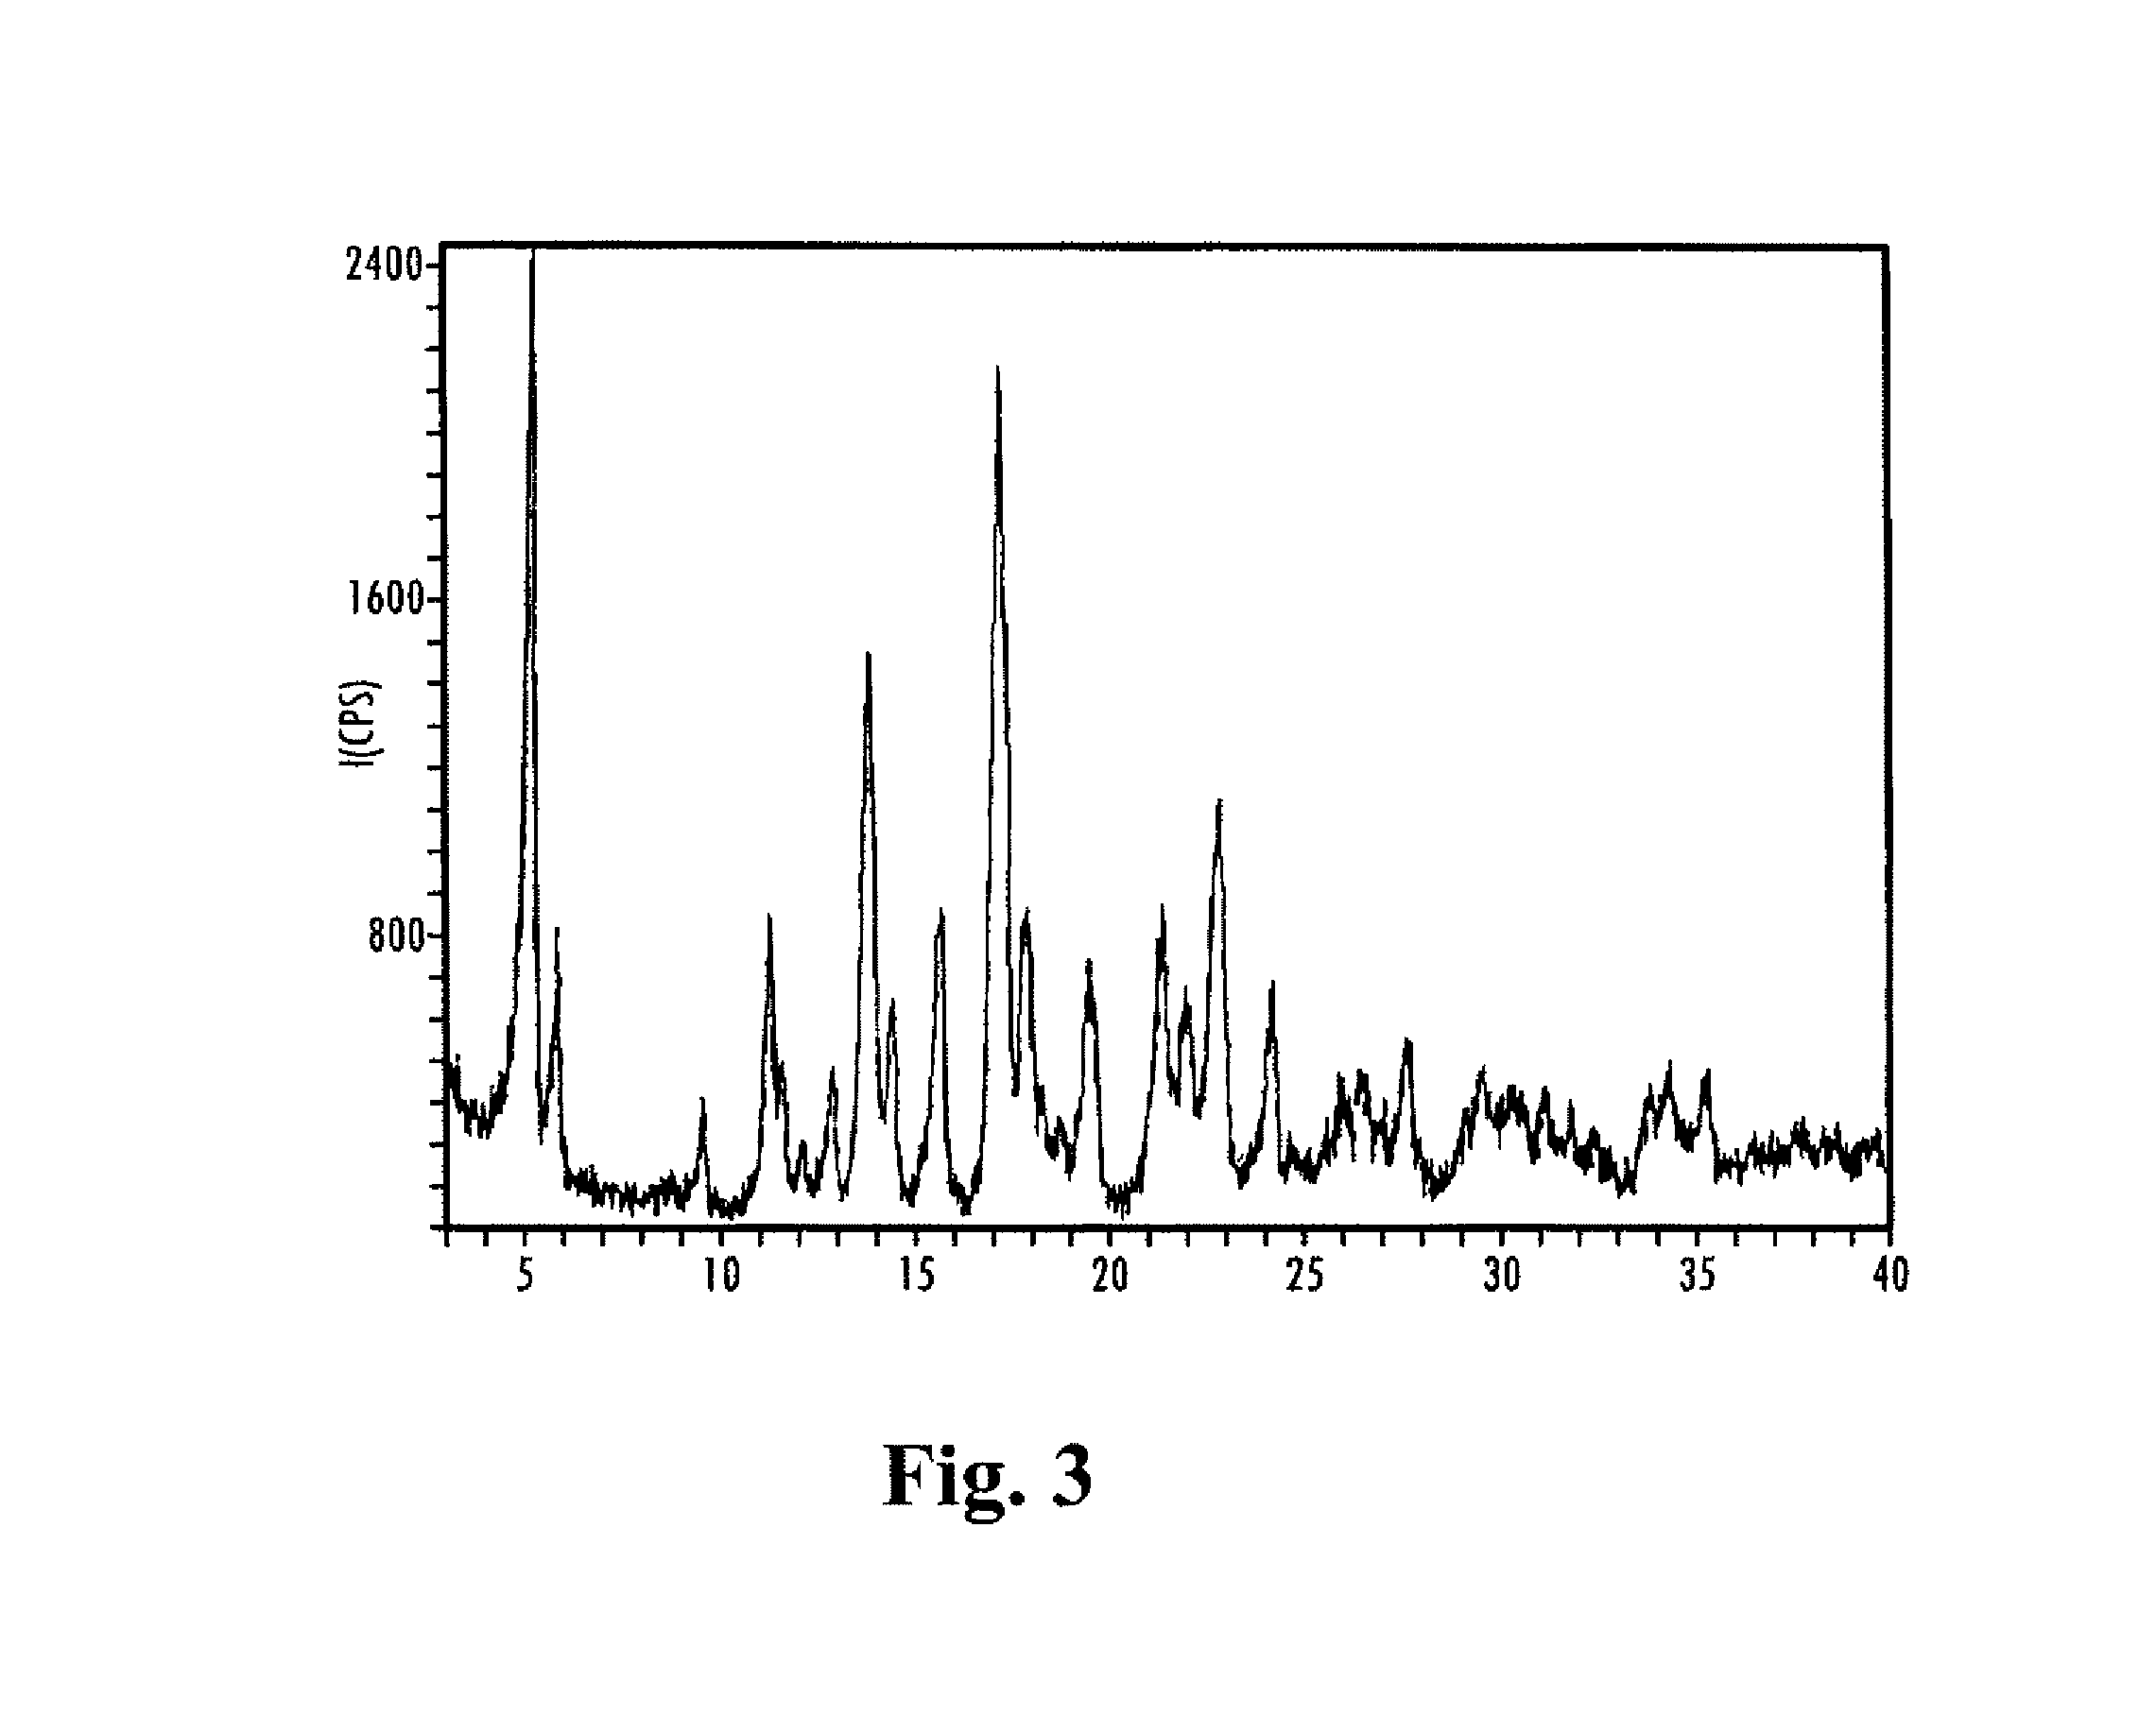 Natural high-potency sweetener compositions with improved temporal profile and/or flavor profile, methods for their formulation, and uses